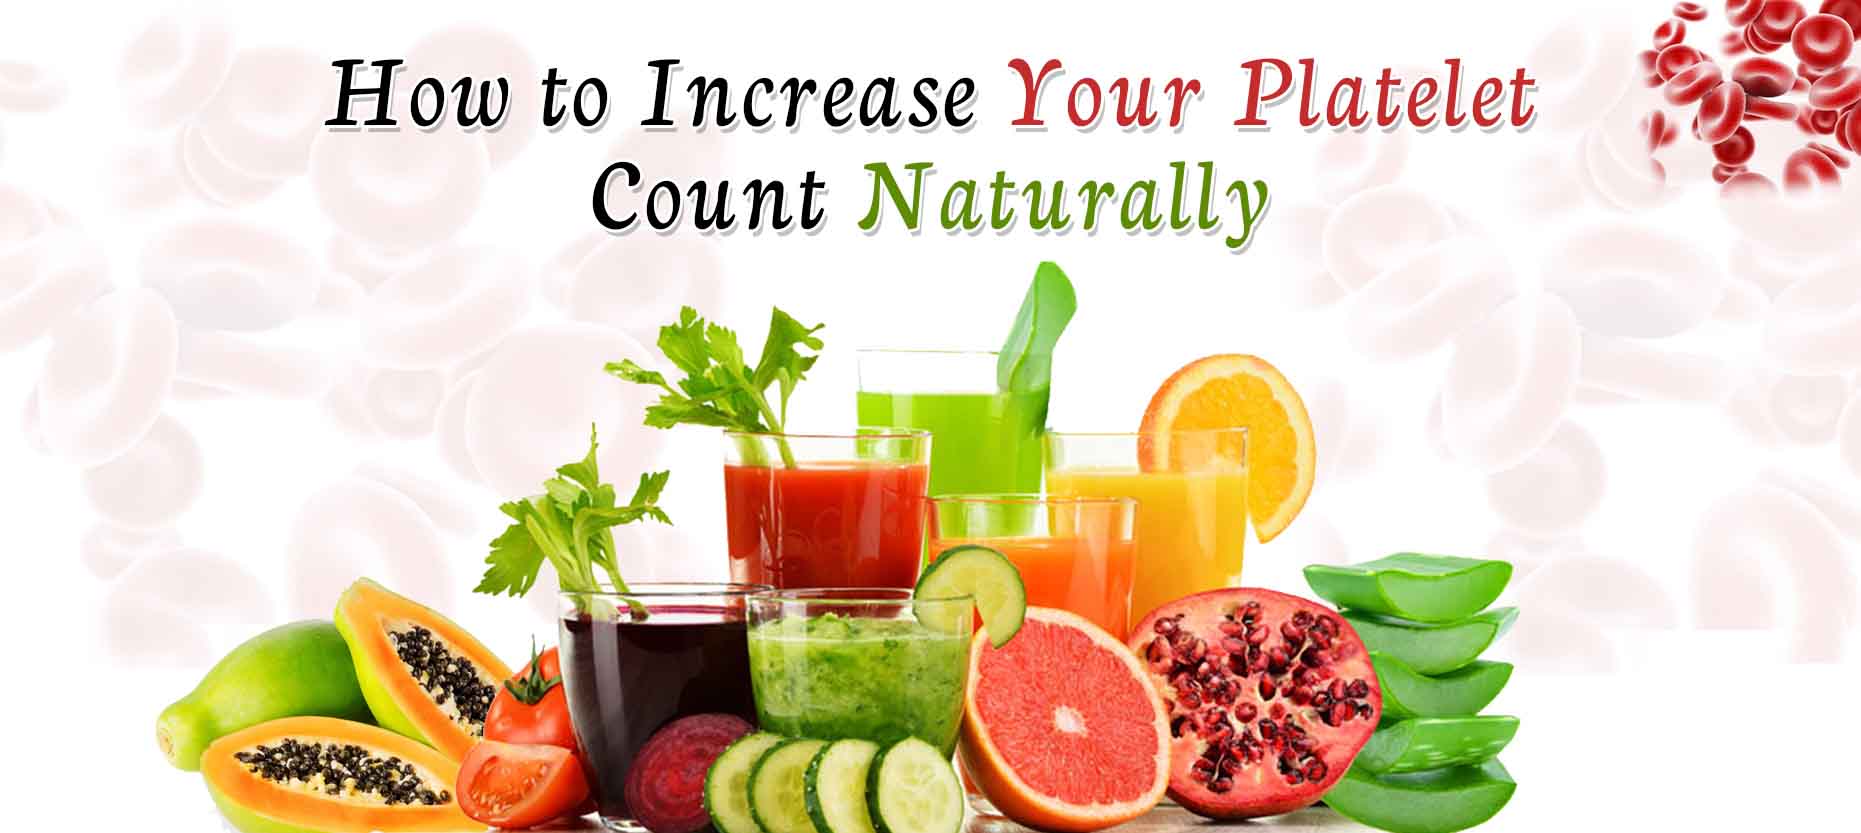 Increase your Platelet count